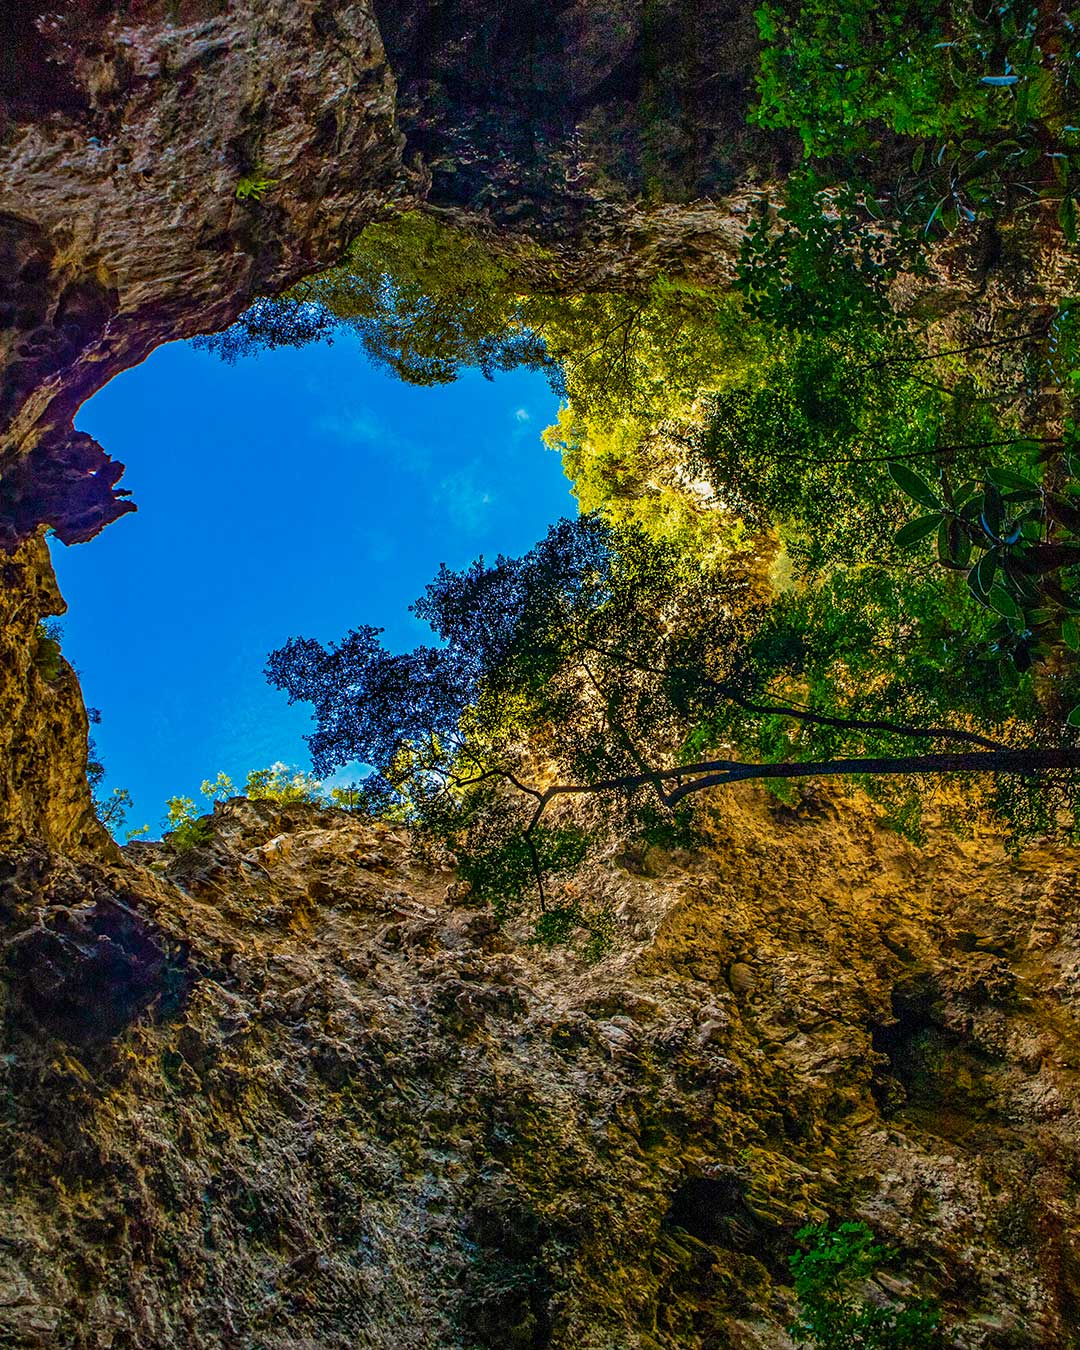 The hole in the top of Phraya Nakhon Cave allowing sunlight to shine down in the cave and rainwater to give life to trees and other vegetation